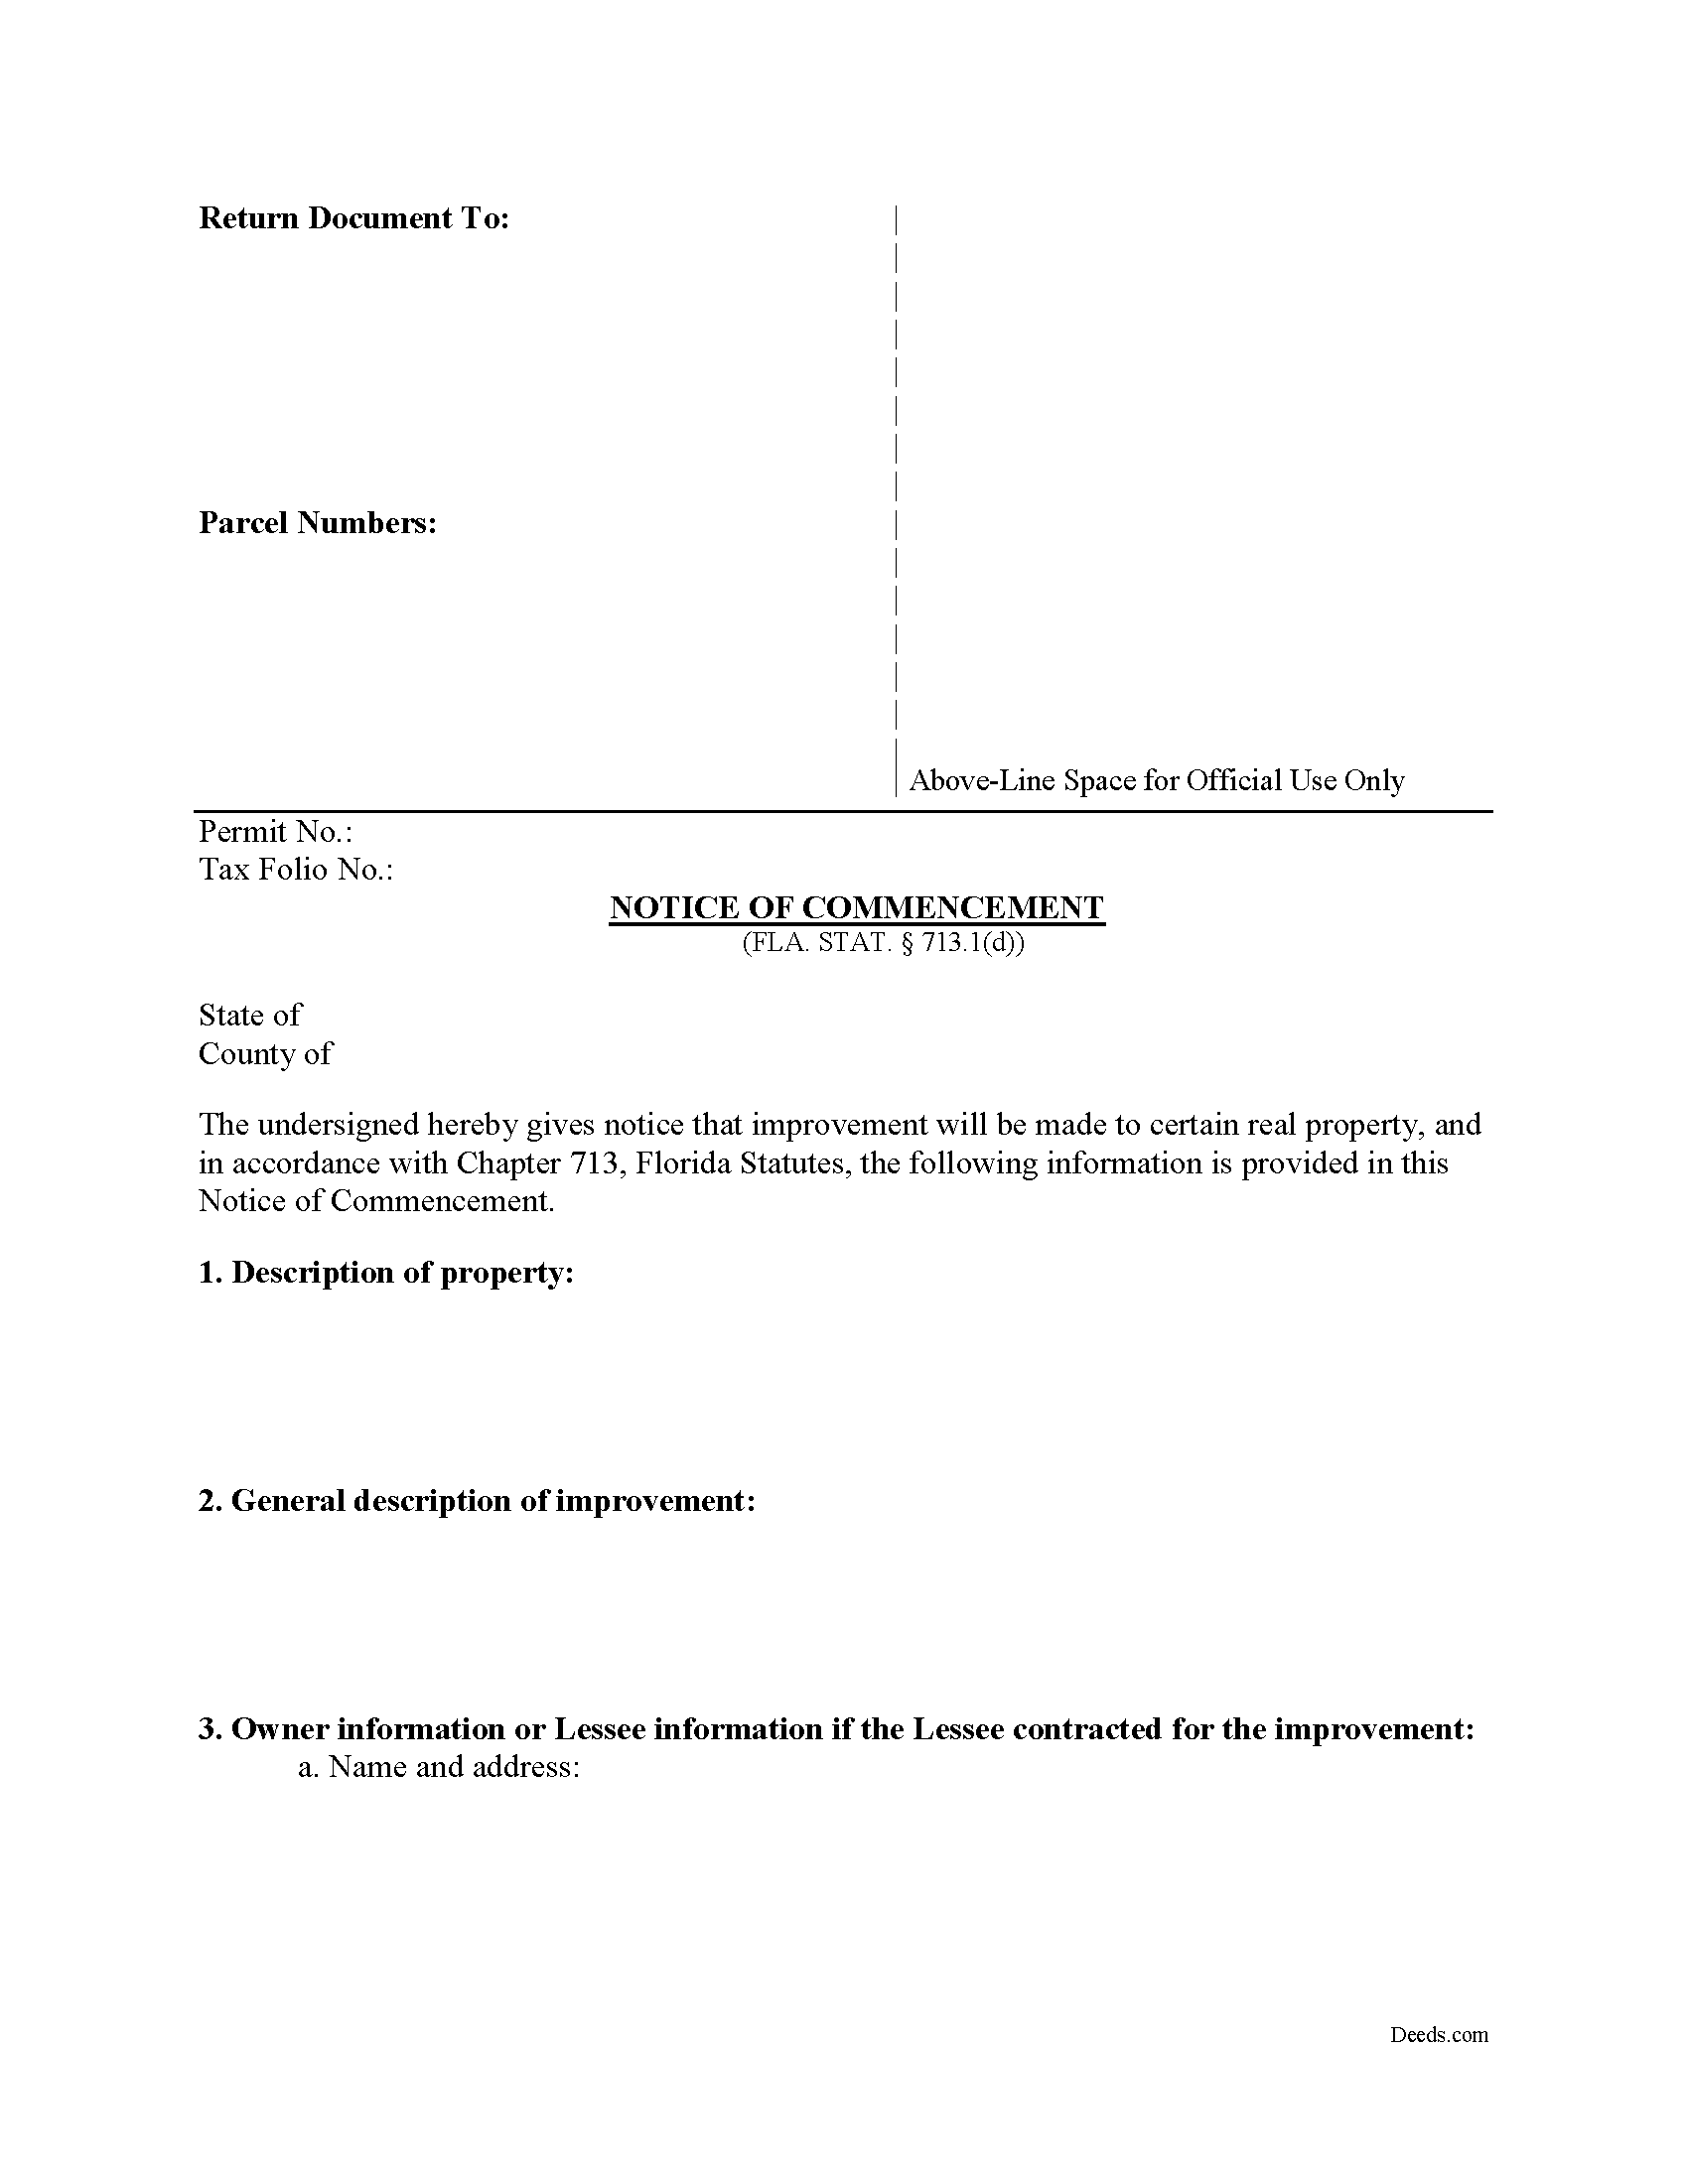 Notice of Commencement Form